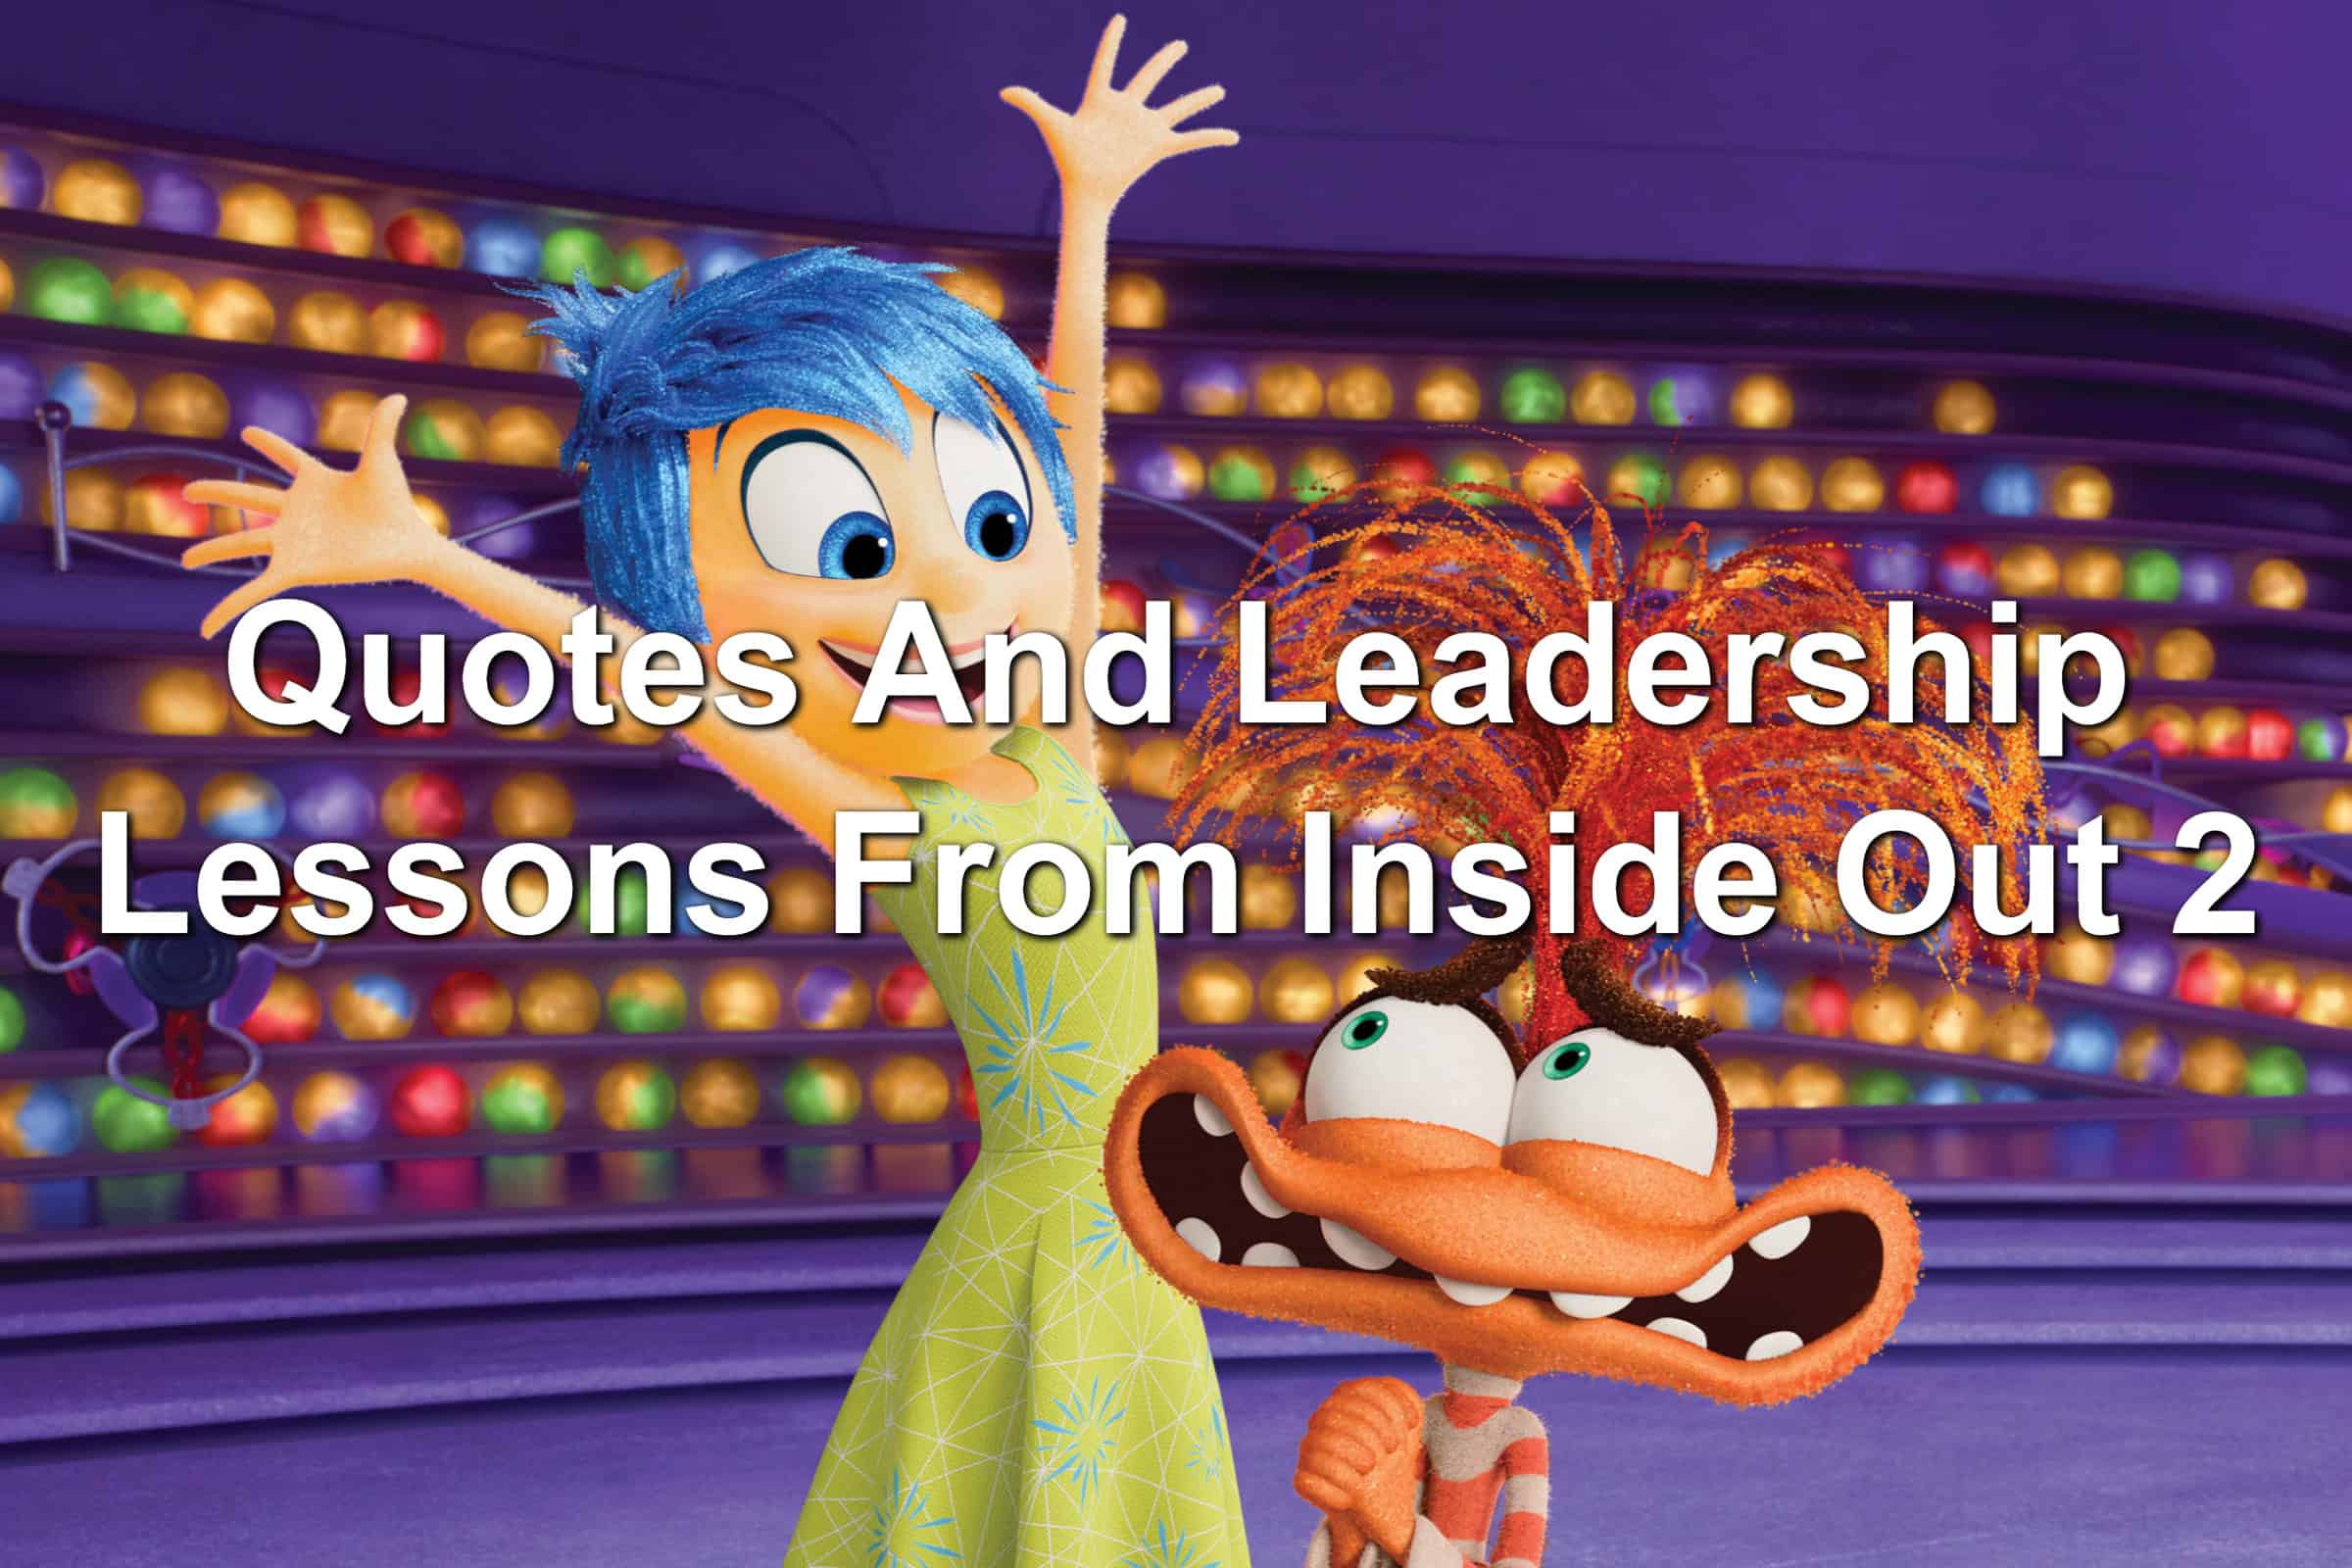 Joy (a blue-haired woman) and Anxiety (a creature with a worried expression) with colored balls behind them. Scene from Inside Out 2.